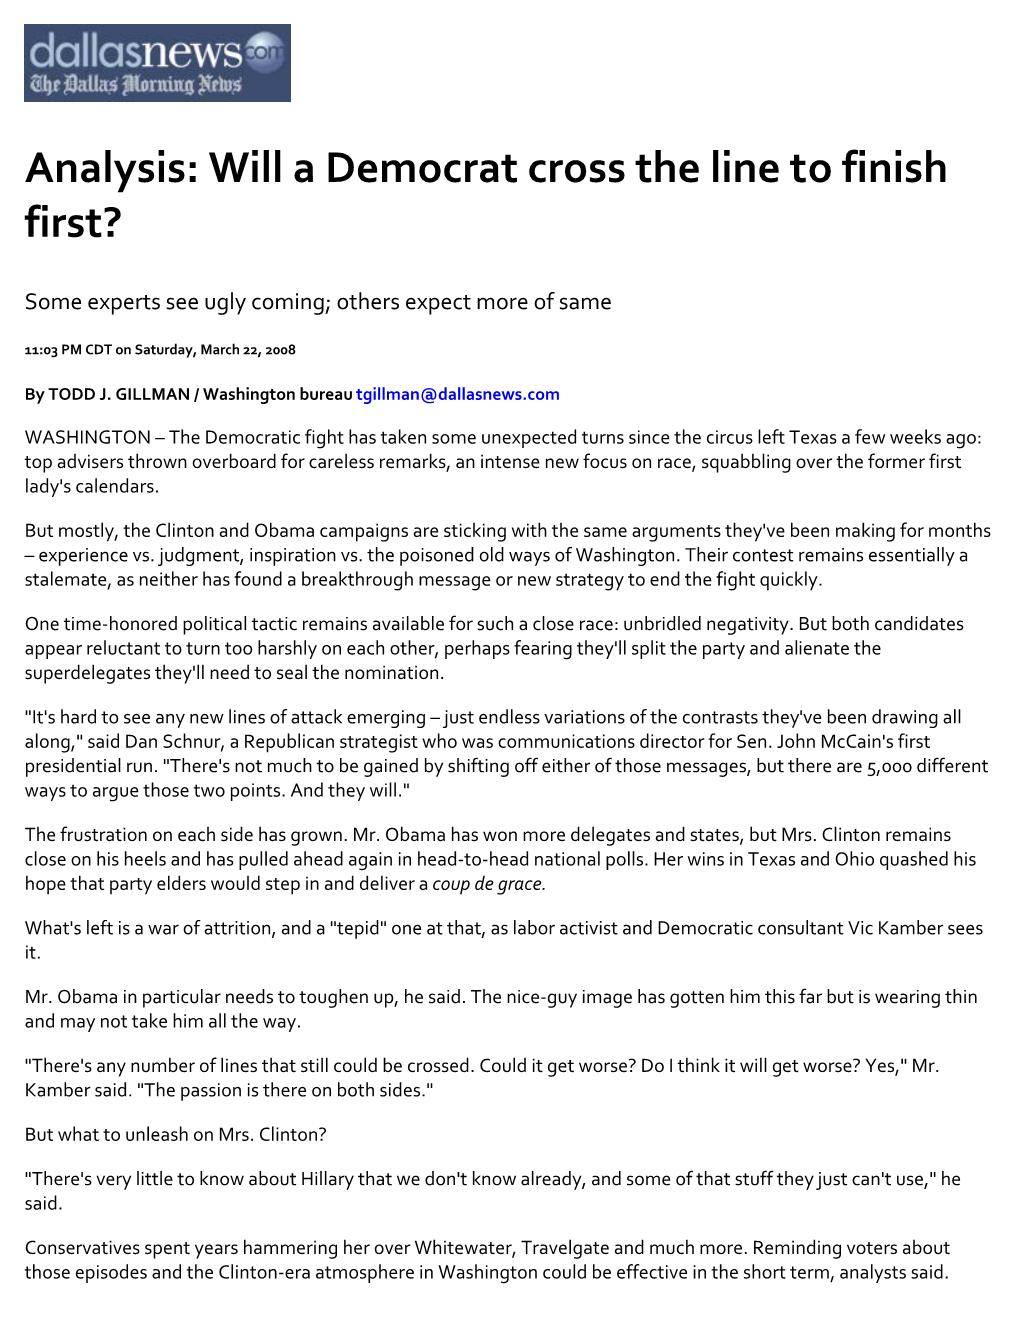 Analysis: Will a Democrat Cross the Line to Finish First?